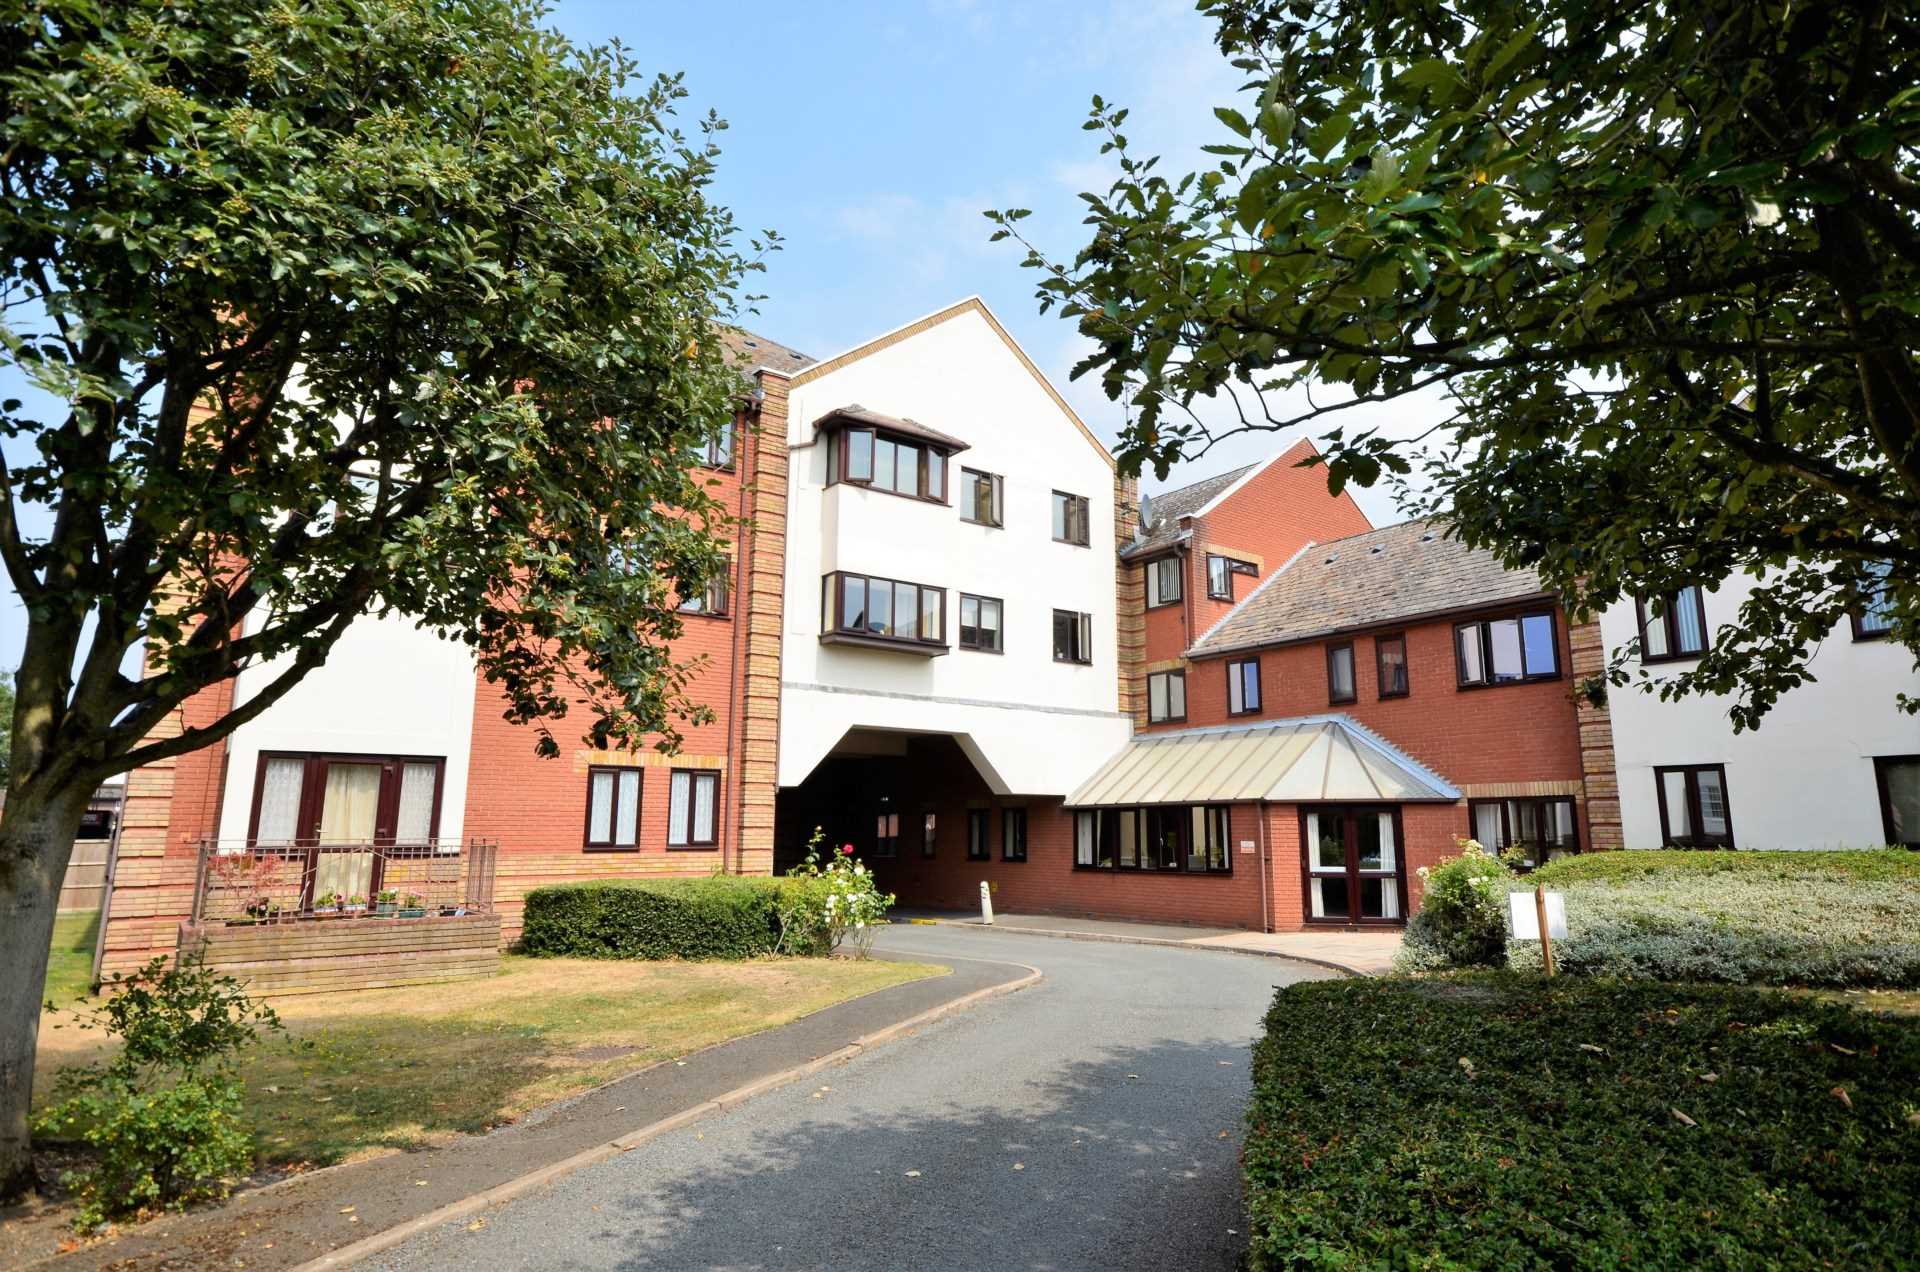 Albion Court, Billericay, Image 12